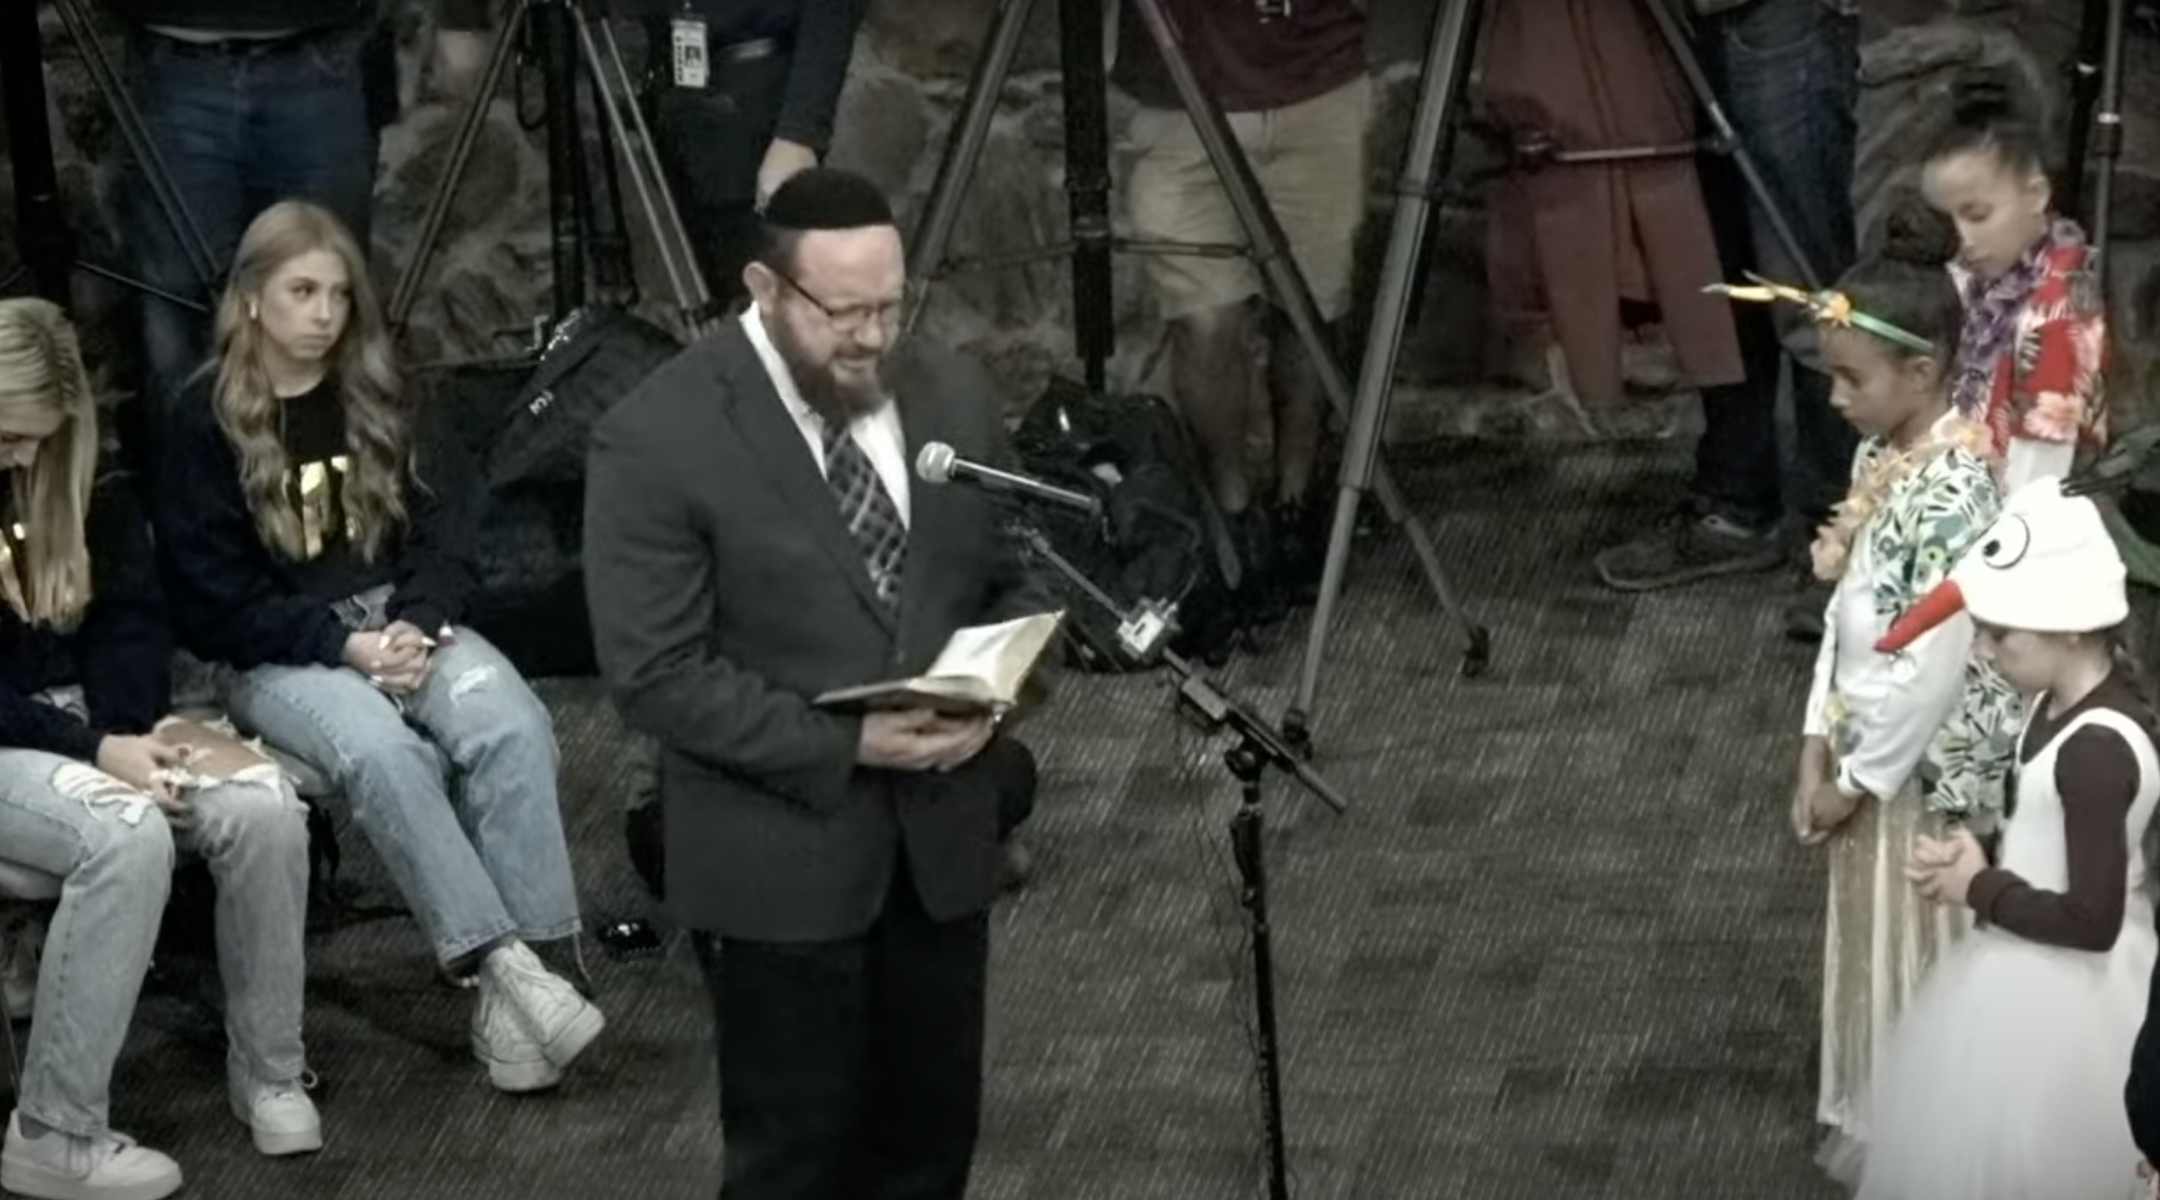 Mark Aaron Griffin, a Messianic “rabbi” awaiting trial on four counts of sexual assault, leads the opening prayer at Keller Independent School District’s board meeting, Dec. 12, 2022. (Screenshot)